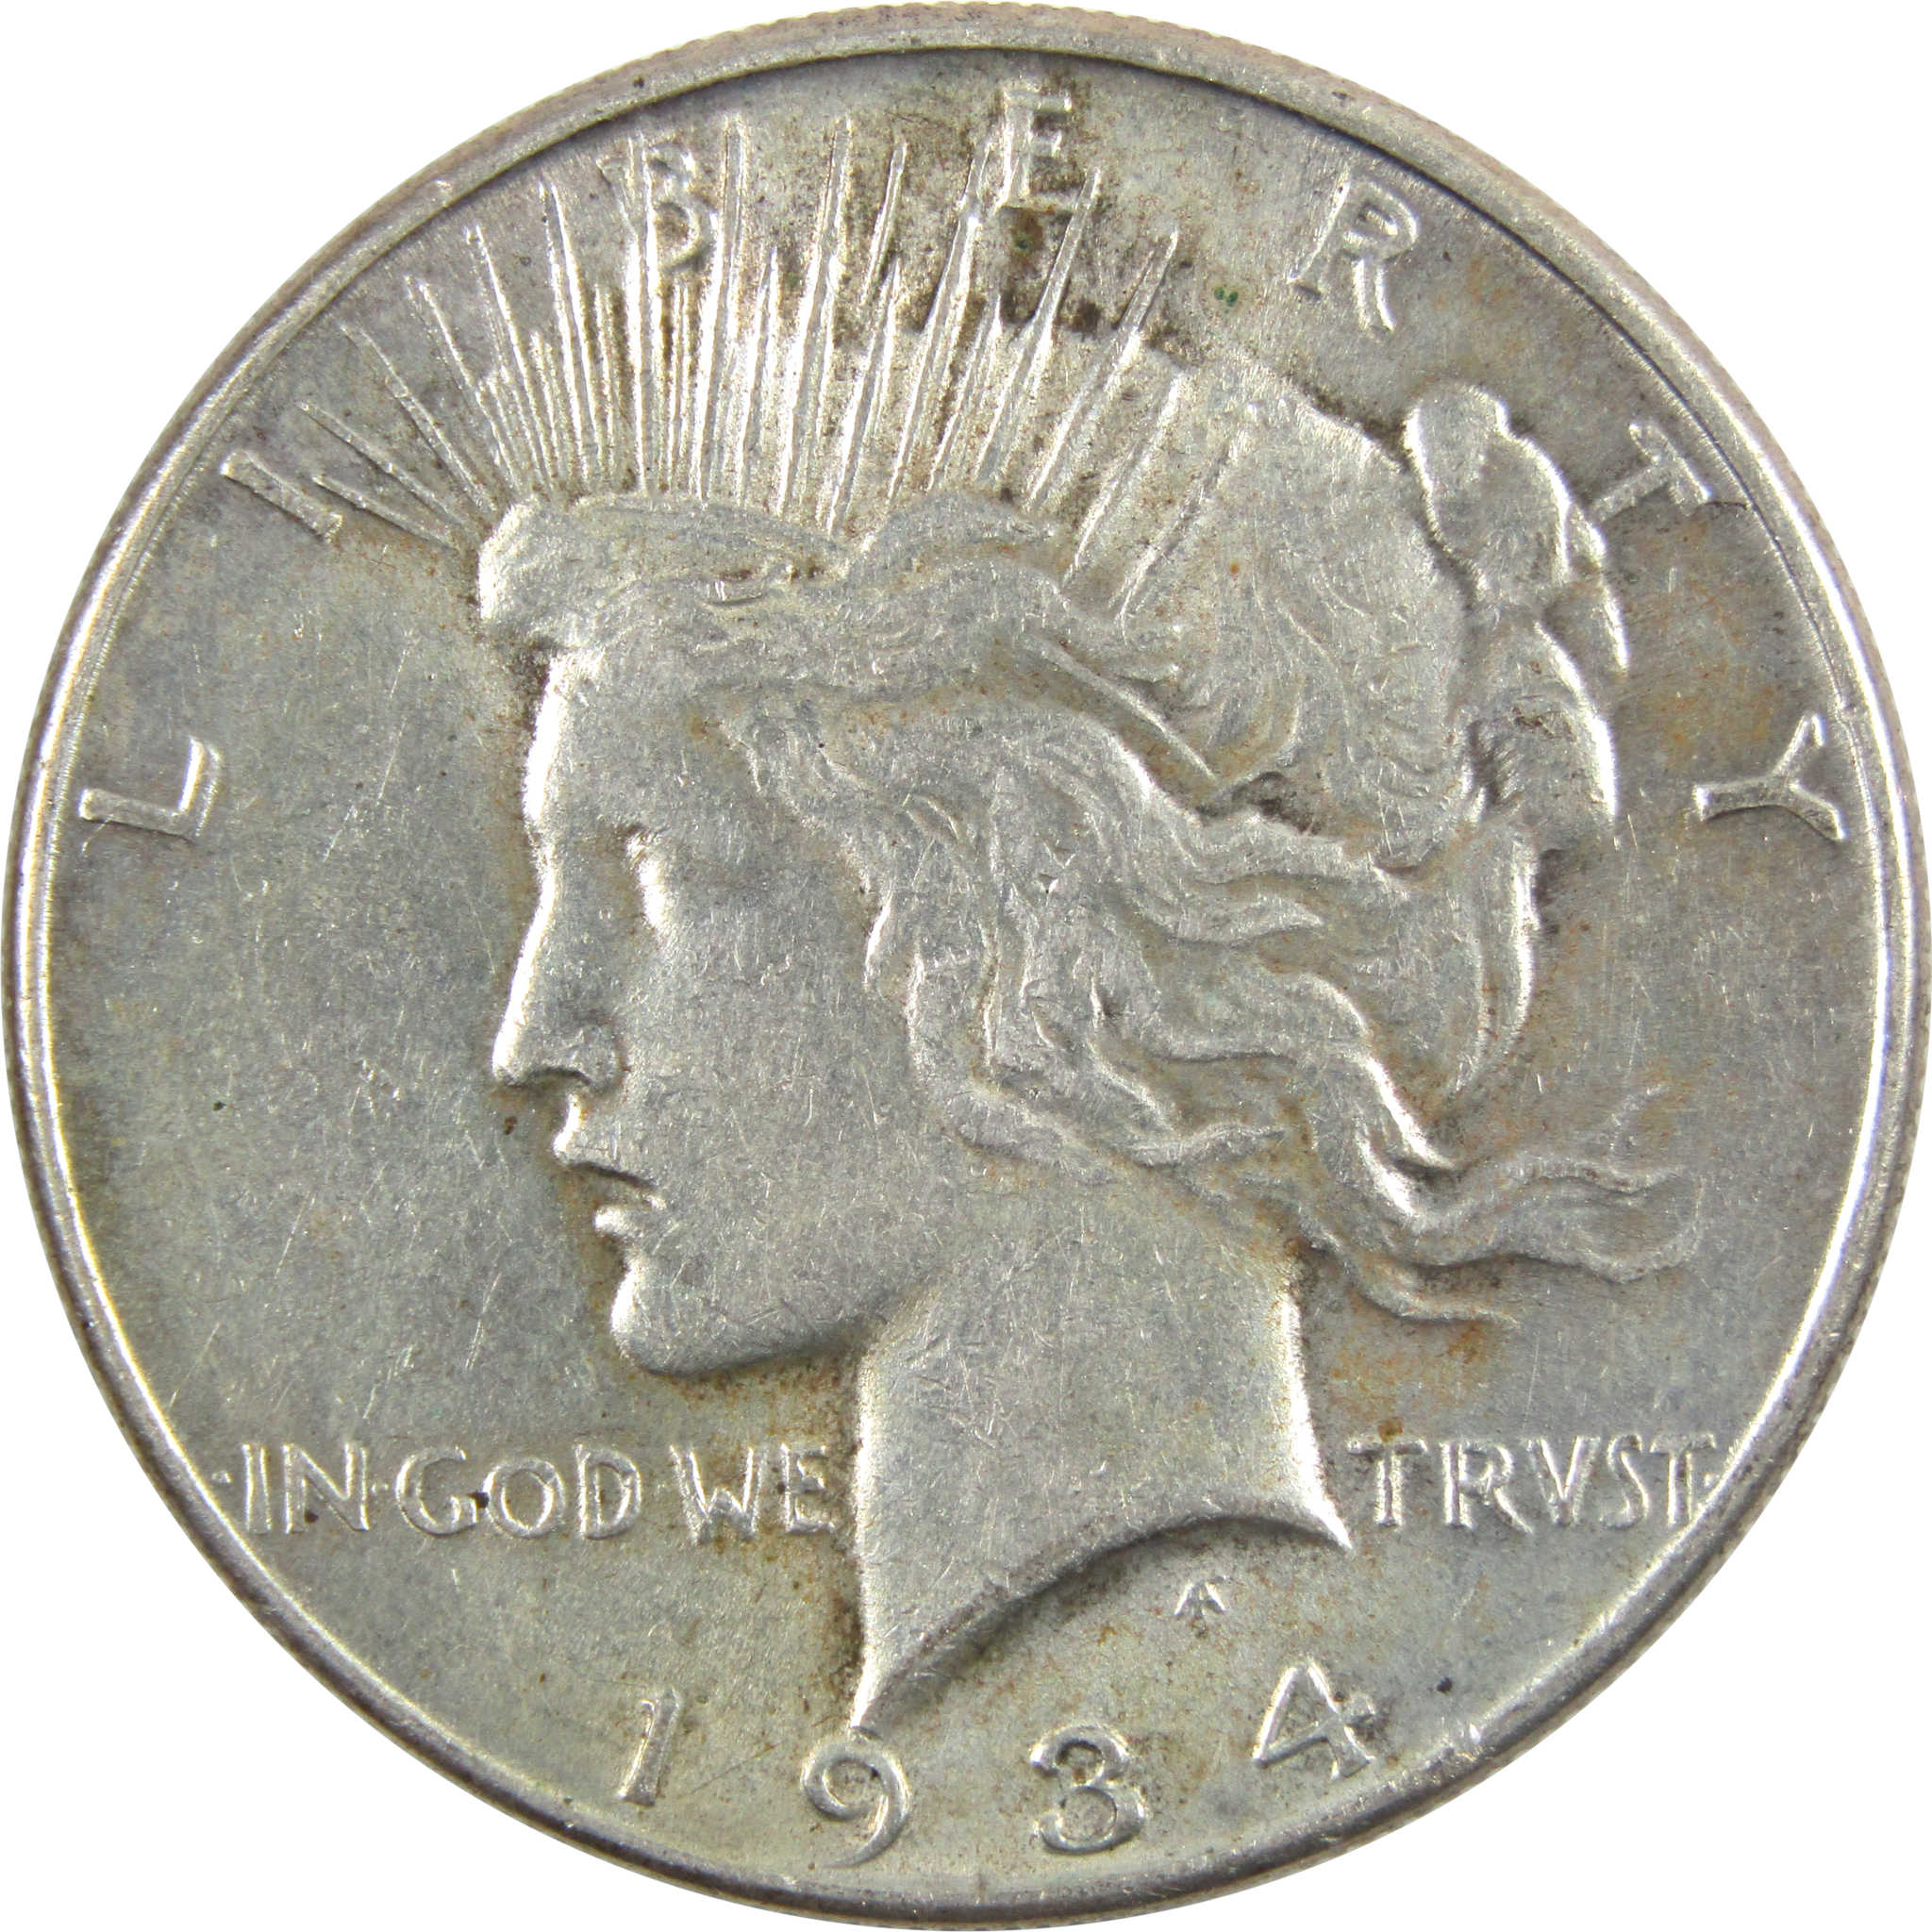 1934 Peace Dollar XF EF Extremely Fine 90% Silver $1 Coin SKU:I5933